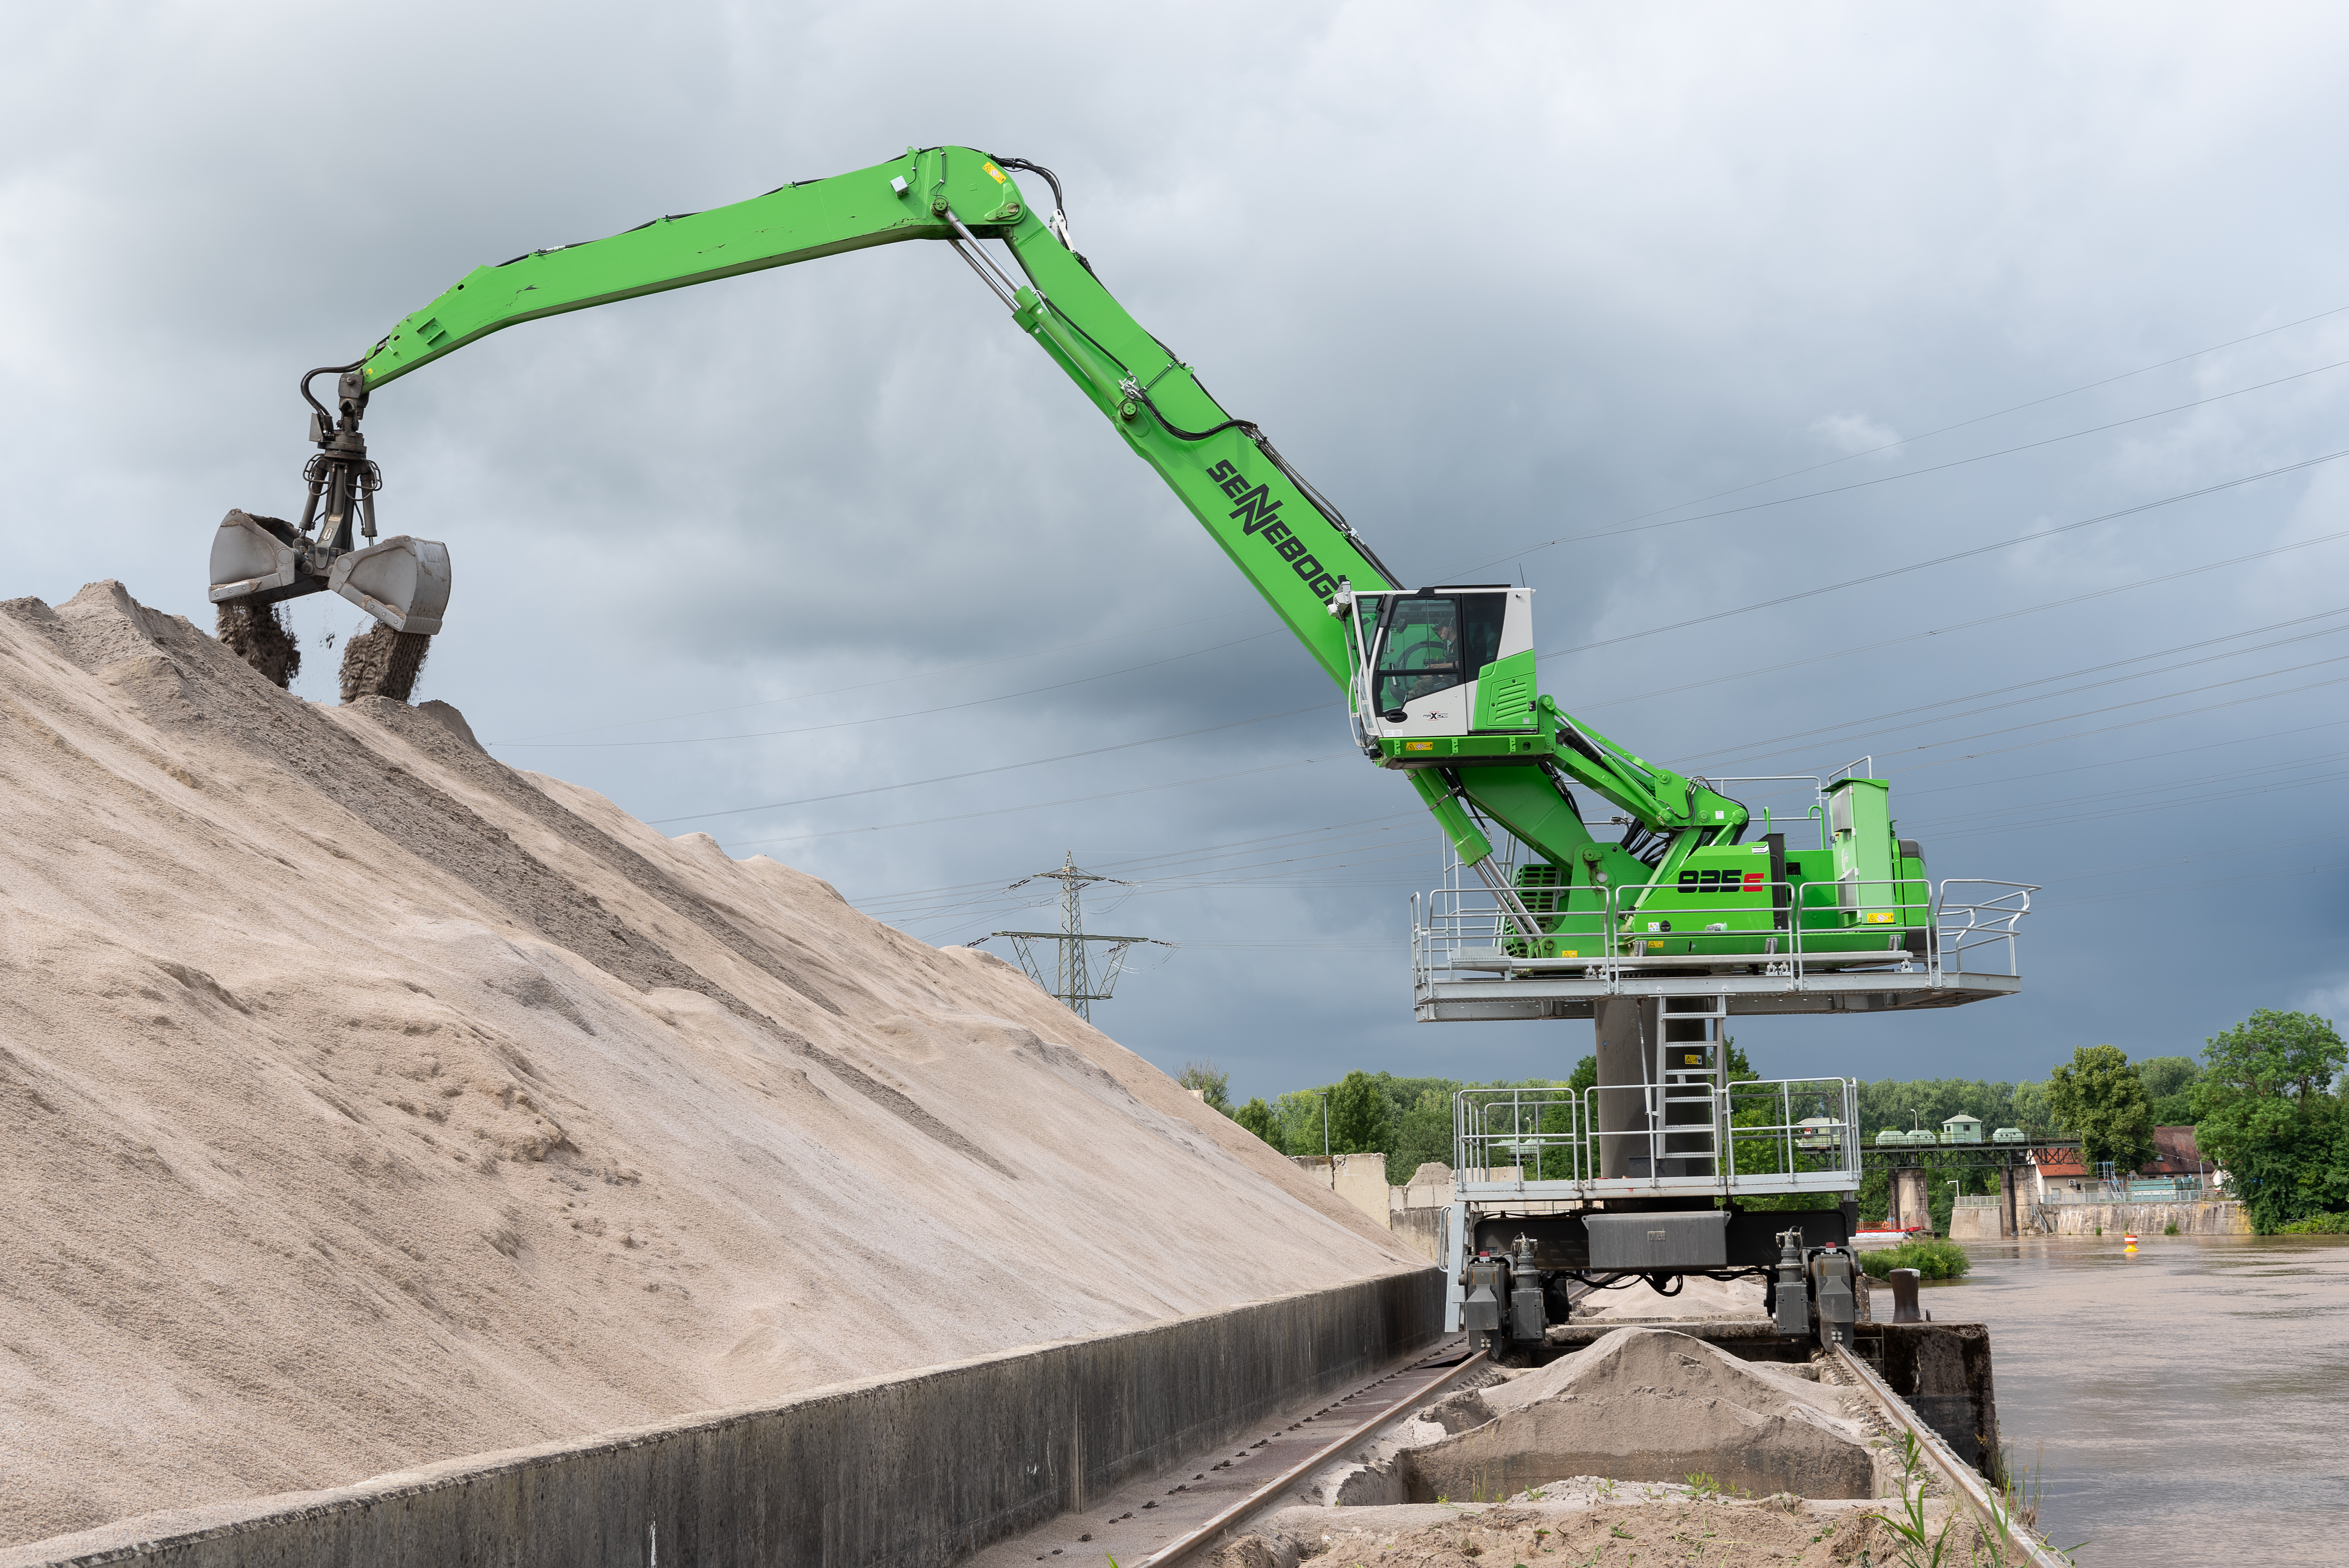 Thanks to the 835 E with powerful electric drive, tons of bulk material are handled efficiently